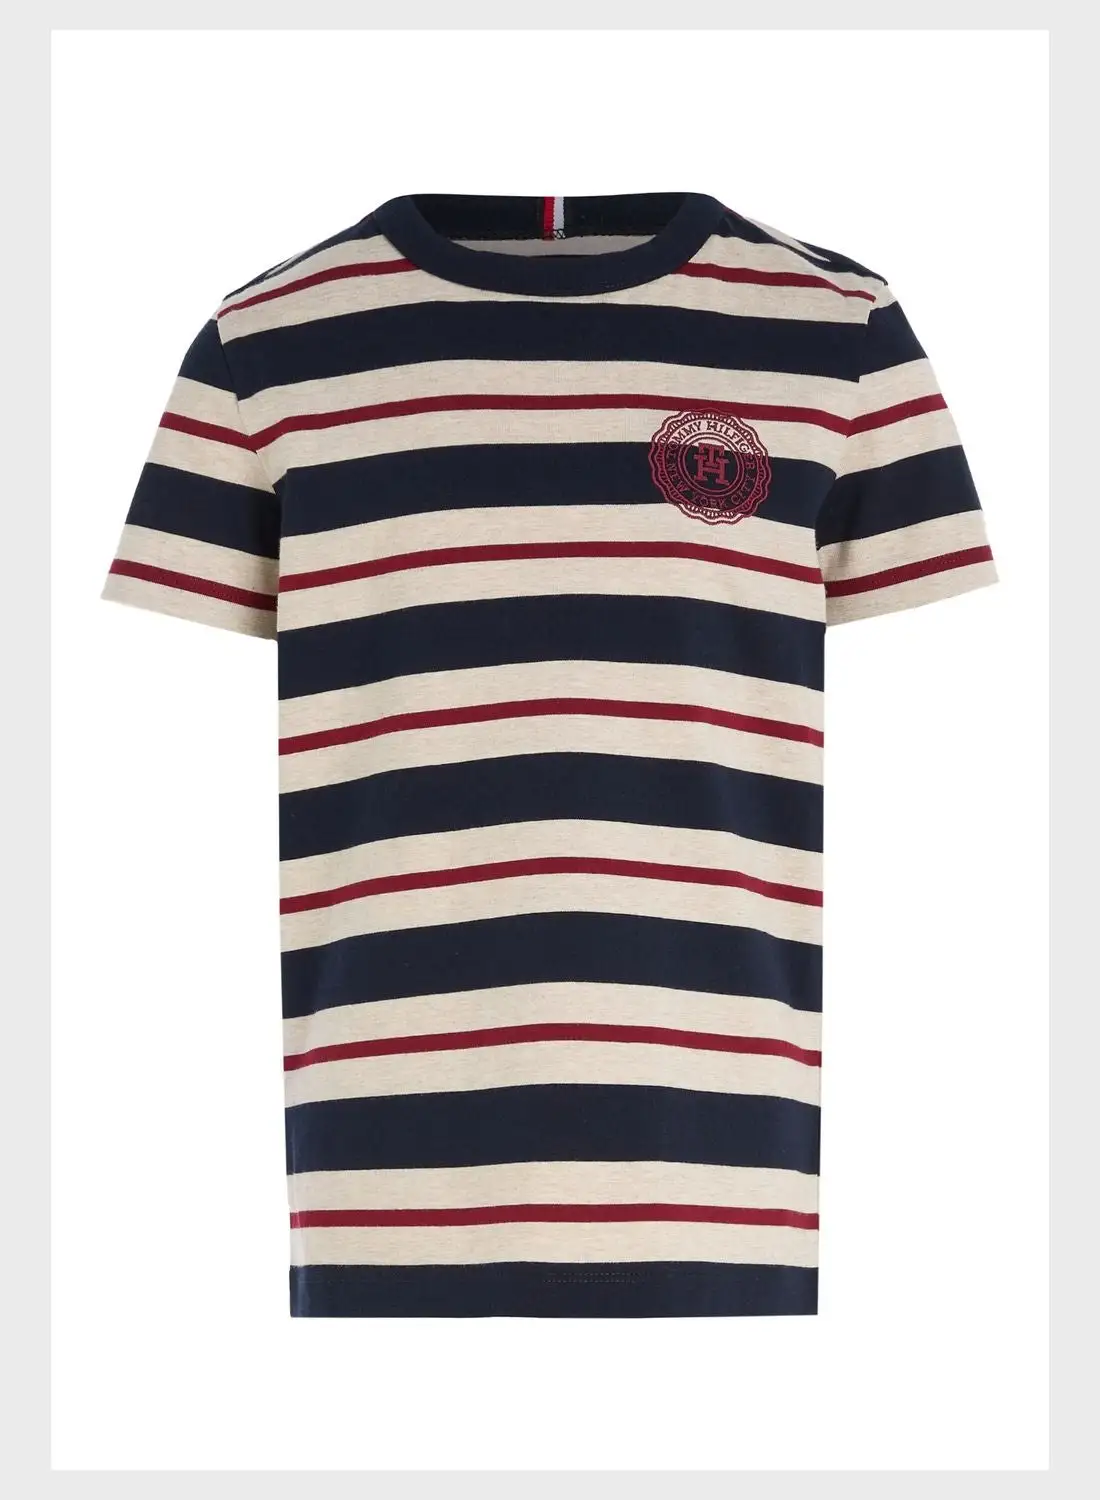 TOMMY HILFIGER Youth Striped T-Shirt